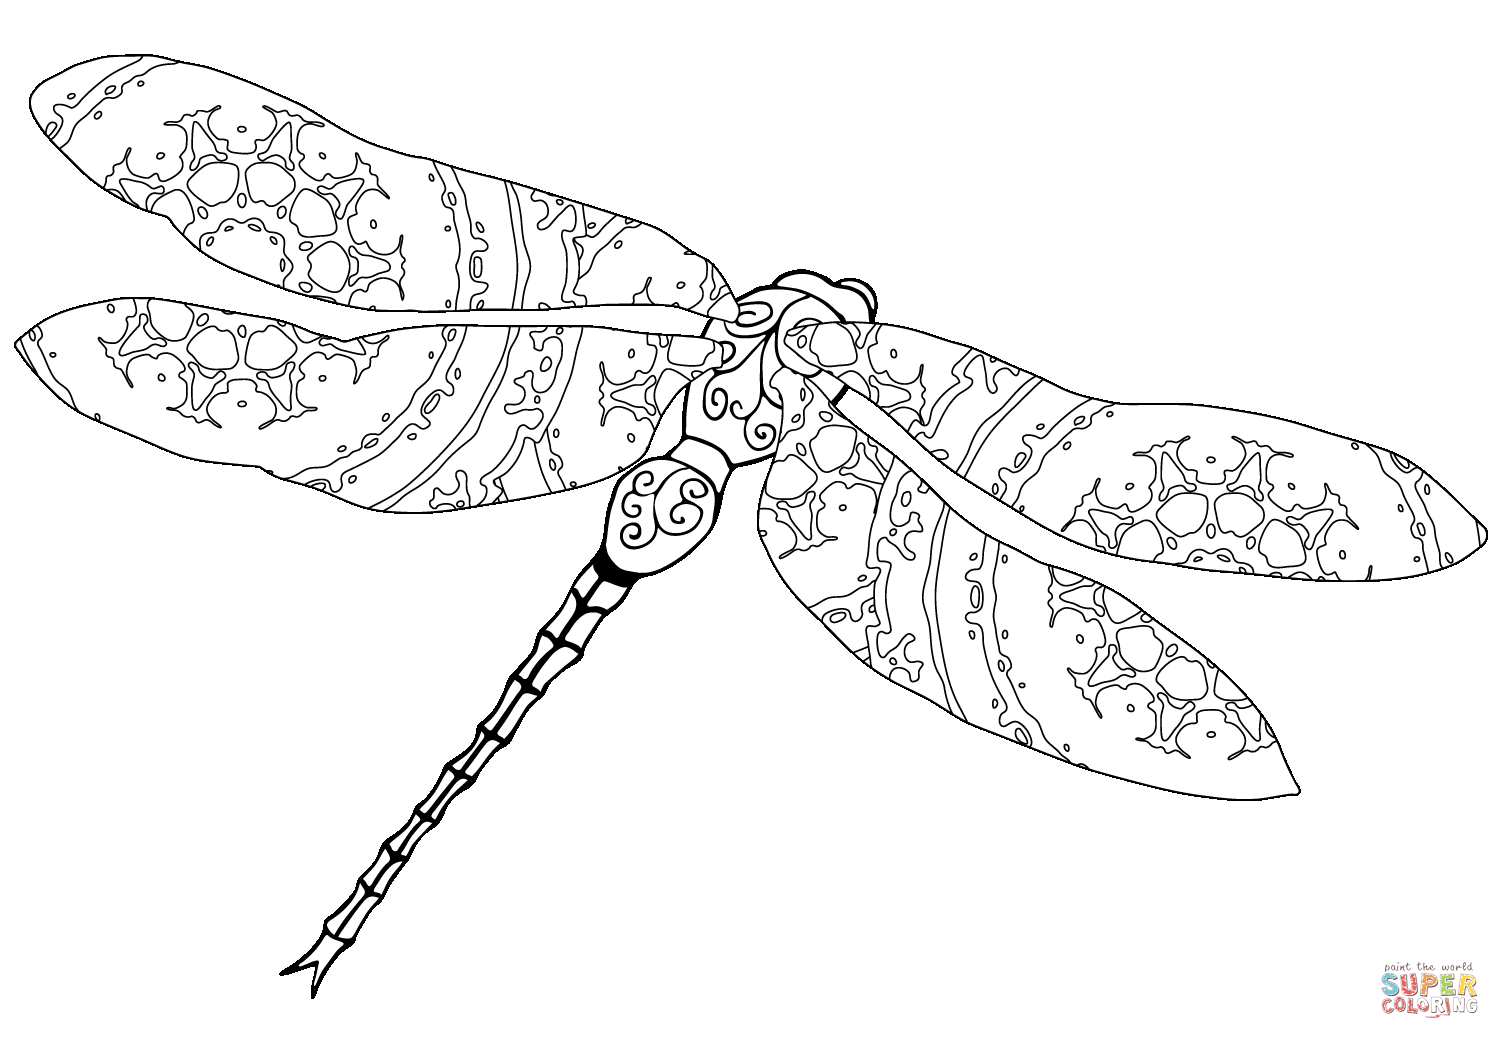 Intricate Dragonfly coloring page | Free Printable Coloring Pages